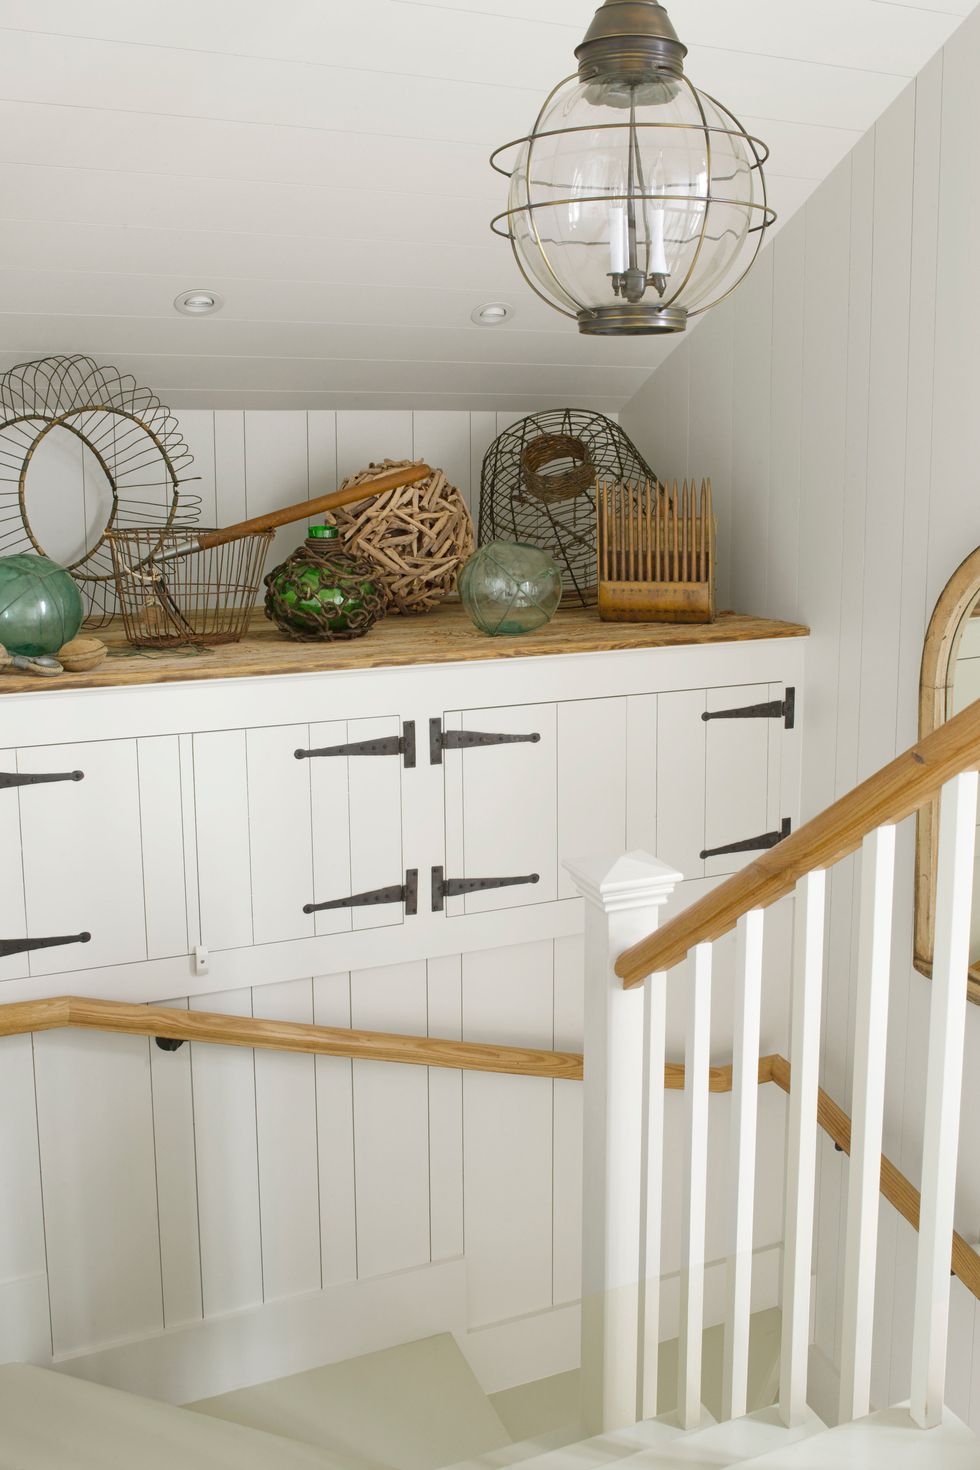 Storage in a staircase landing within a country house - Country Living (Gridley Graves). #staircasedesign